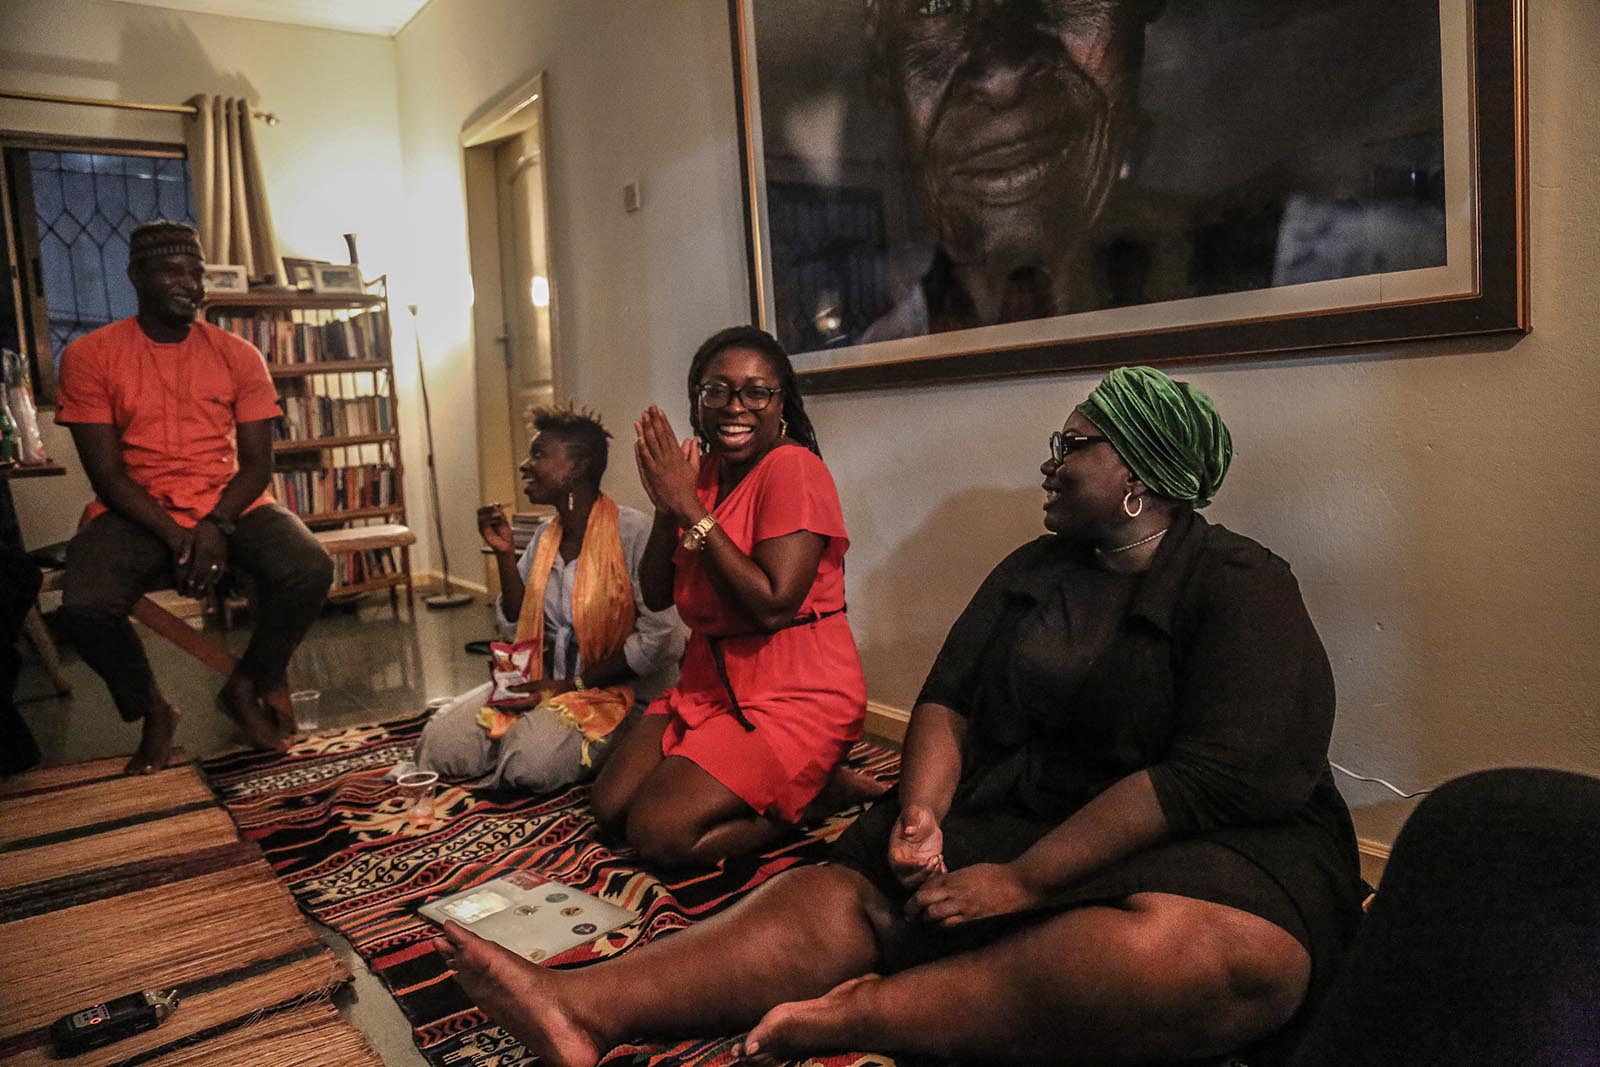 Sekyiamah hosts a gathering of friends in her home to discuss various topics around sexuality.